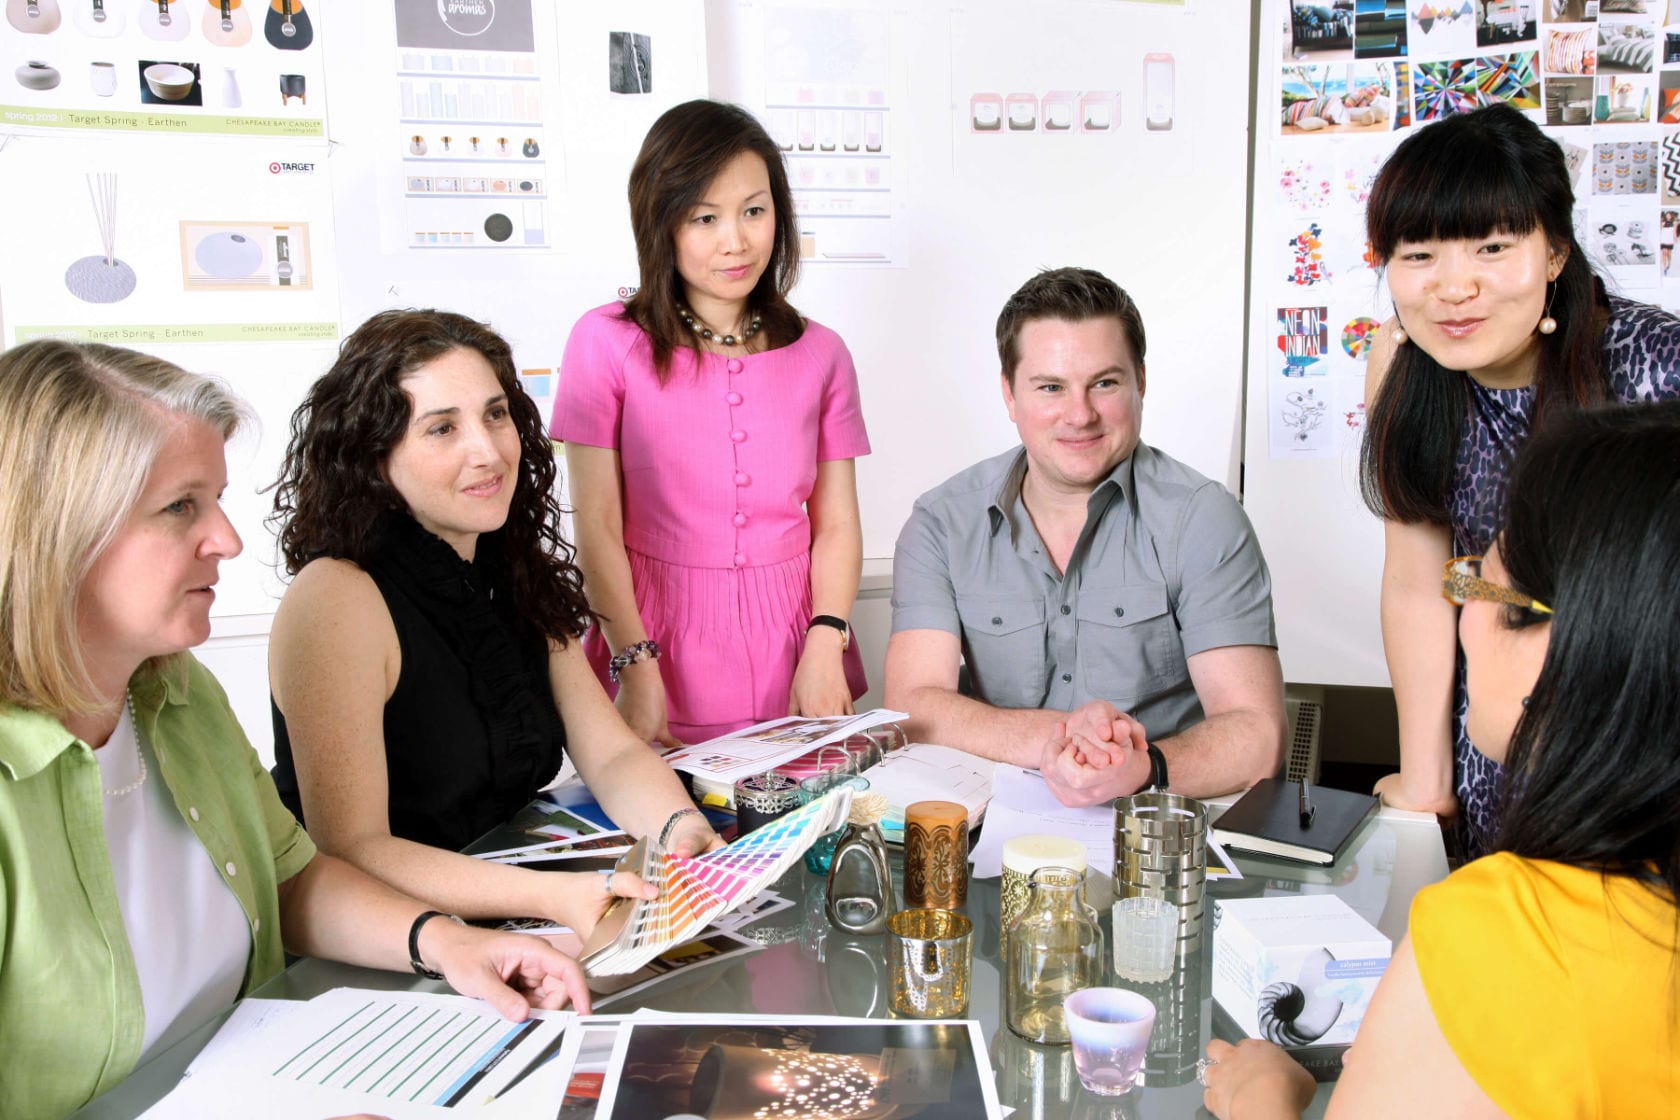 Mei and her design team poised for a new product launch (2007).